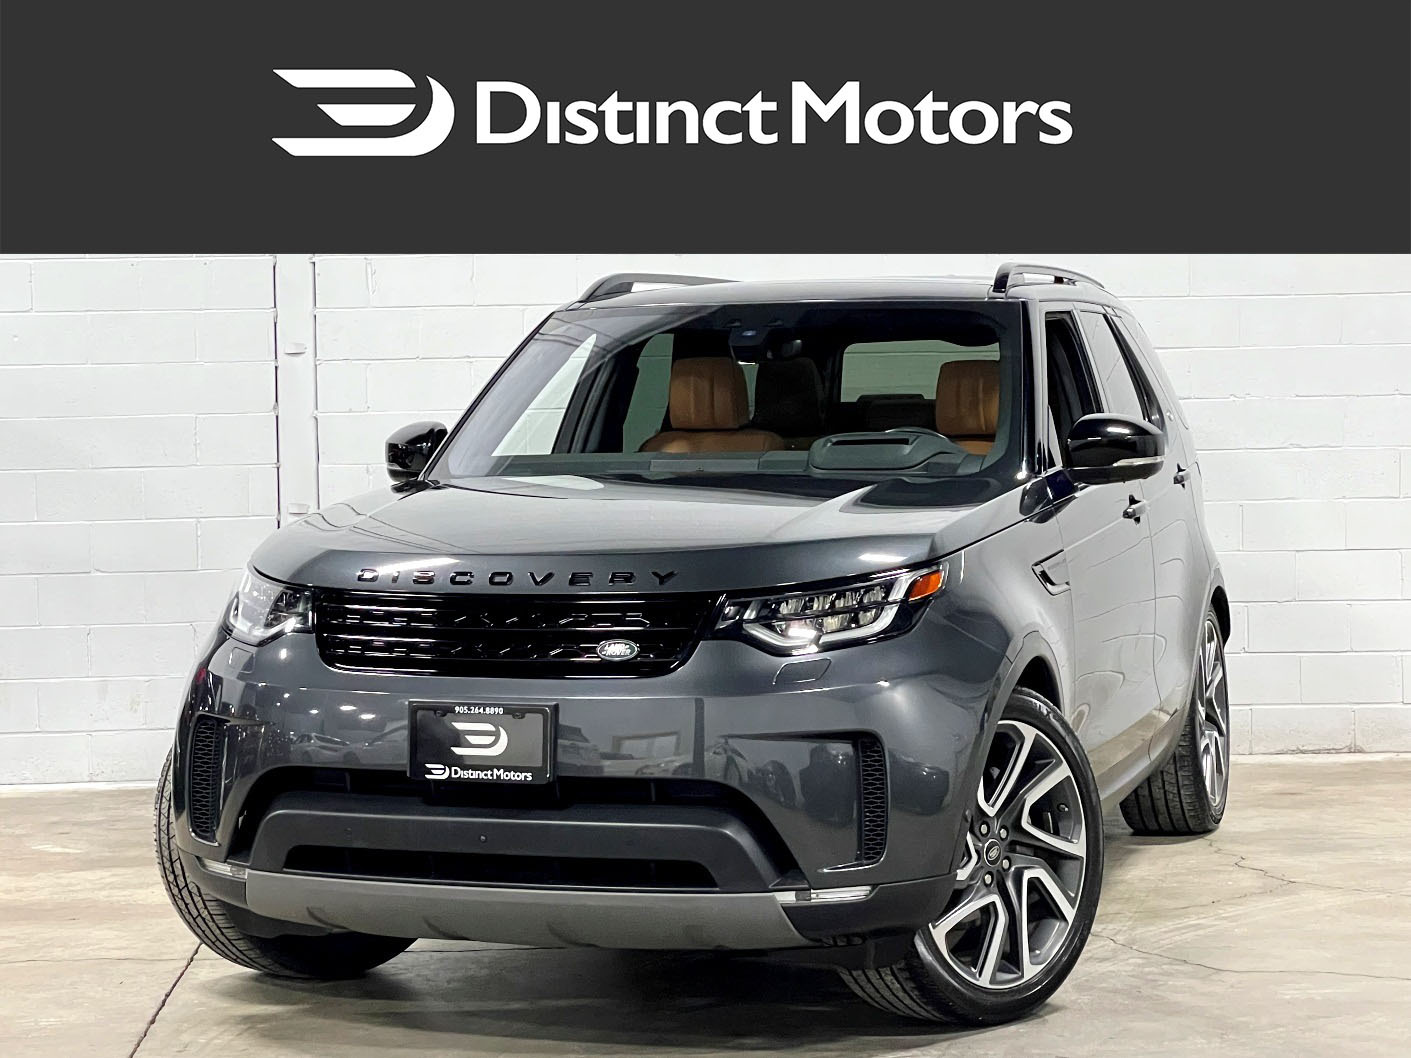 2018 Land Rover Discovery HSE Luxury,22' ALLOYS,VENTED&MASSAGE SEATS,LOADED